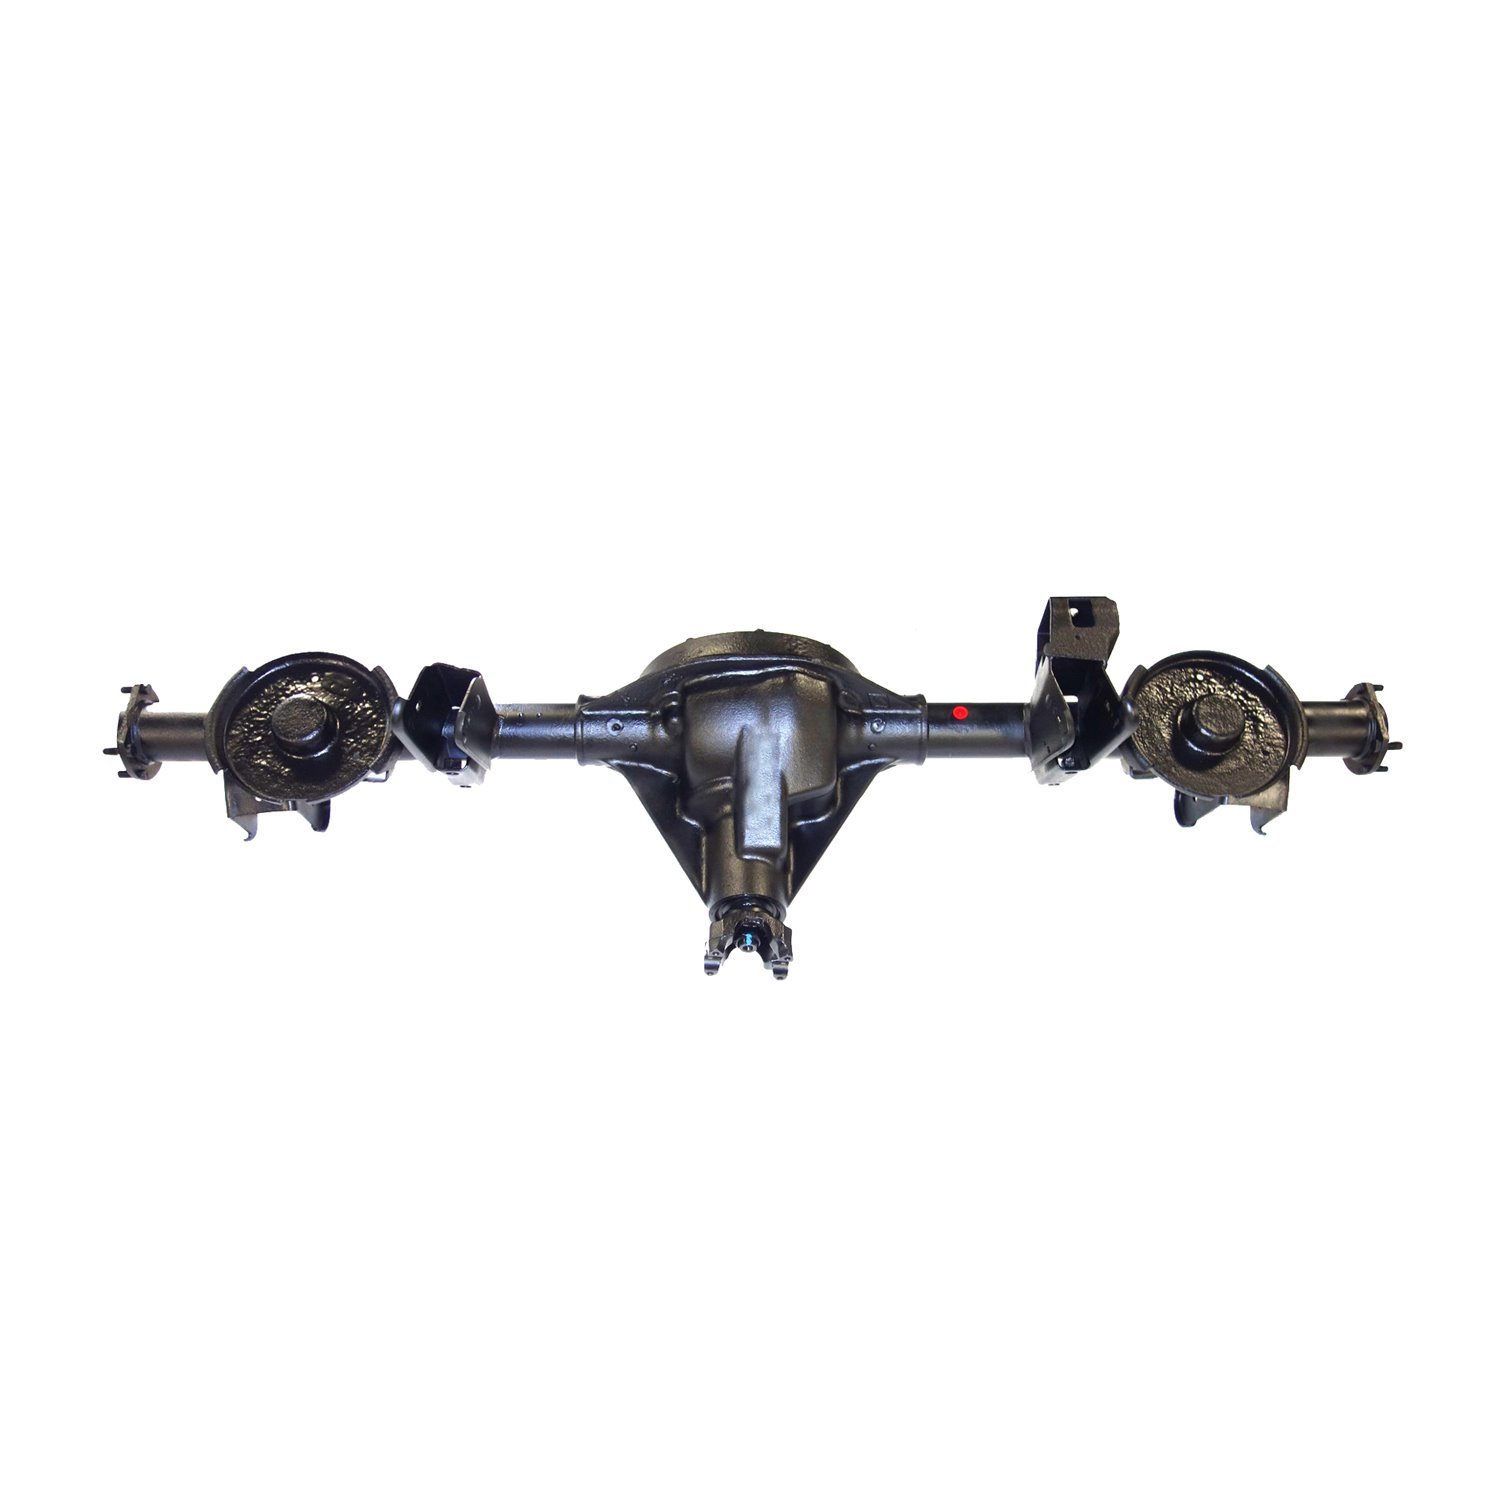 Remanufactured Complete Axle Assembly for Dana 35 99-04 Jeep Grand Cherokee 3.55 Ratio